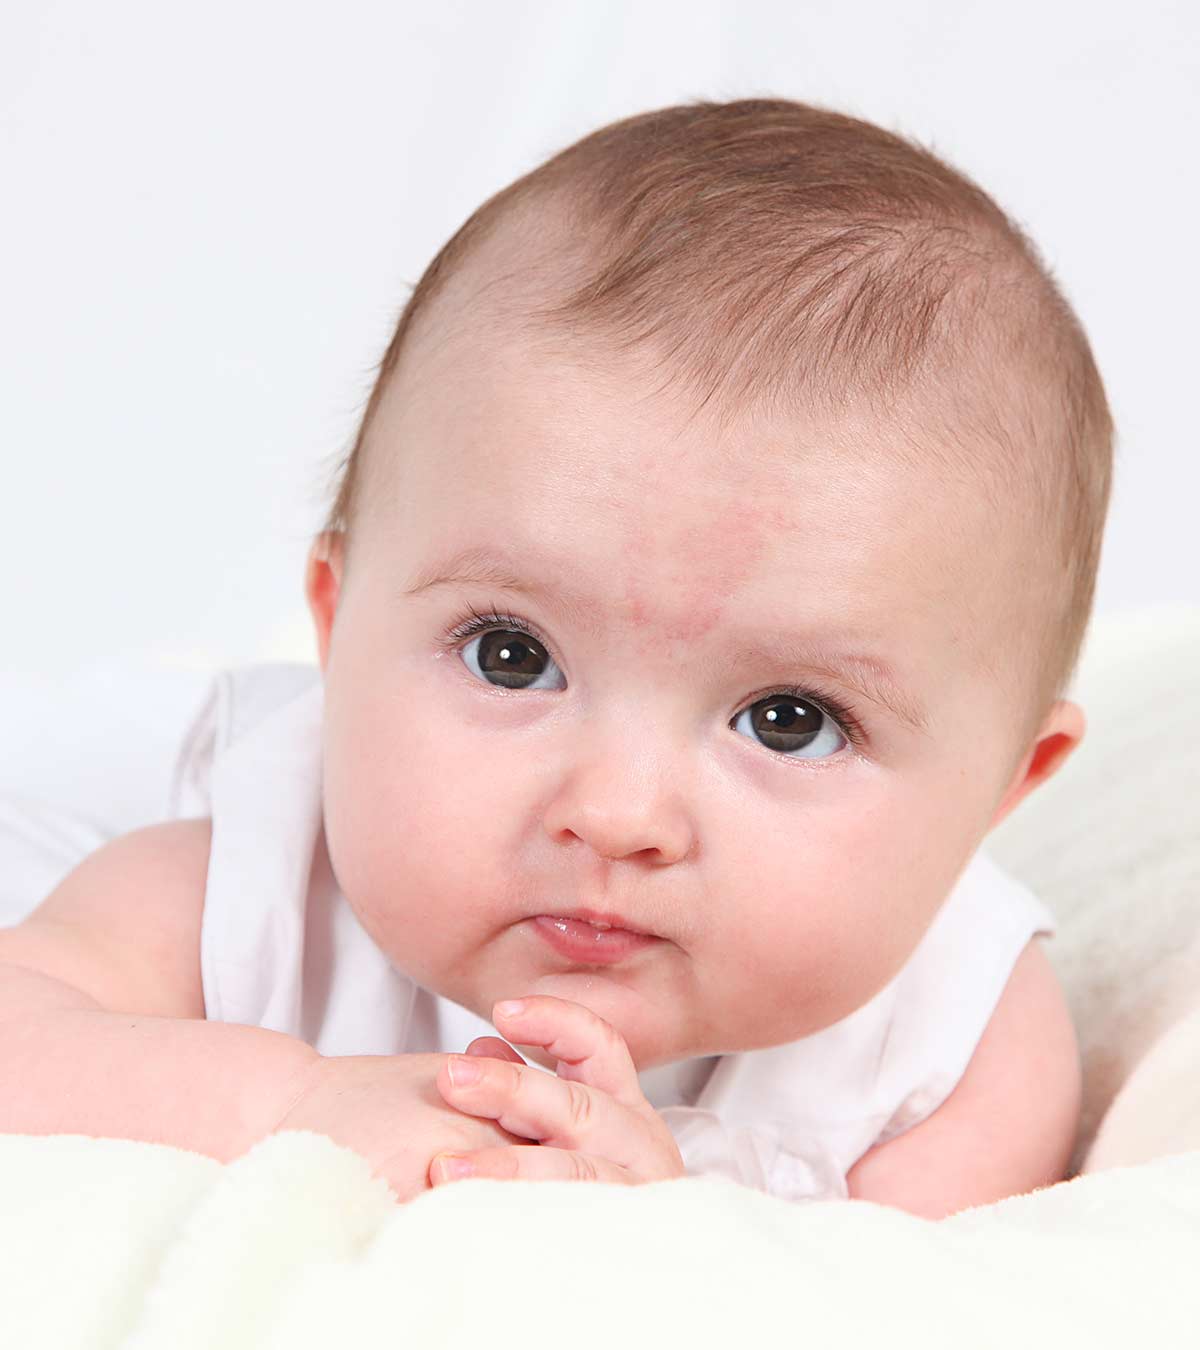 Birthmarks In Babies: Causes, Types And Treatment